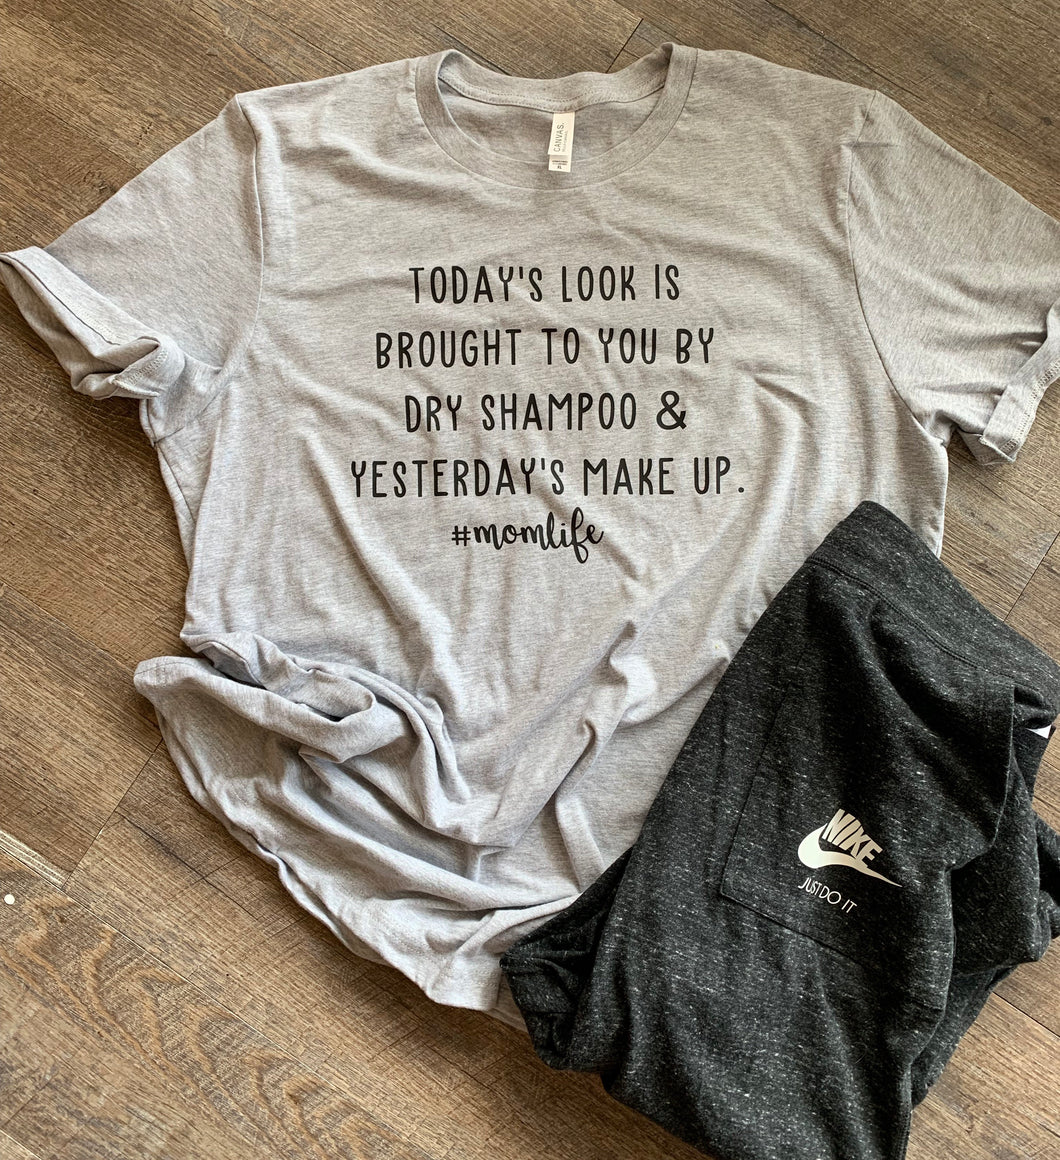 Today’s look is brought to you by dry shampoo and yesterday’s makeup #momlife custom womens graphic tee tshirt - Mavictoria Designs Hot Press Express